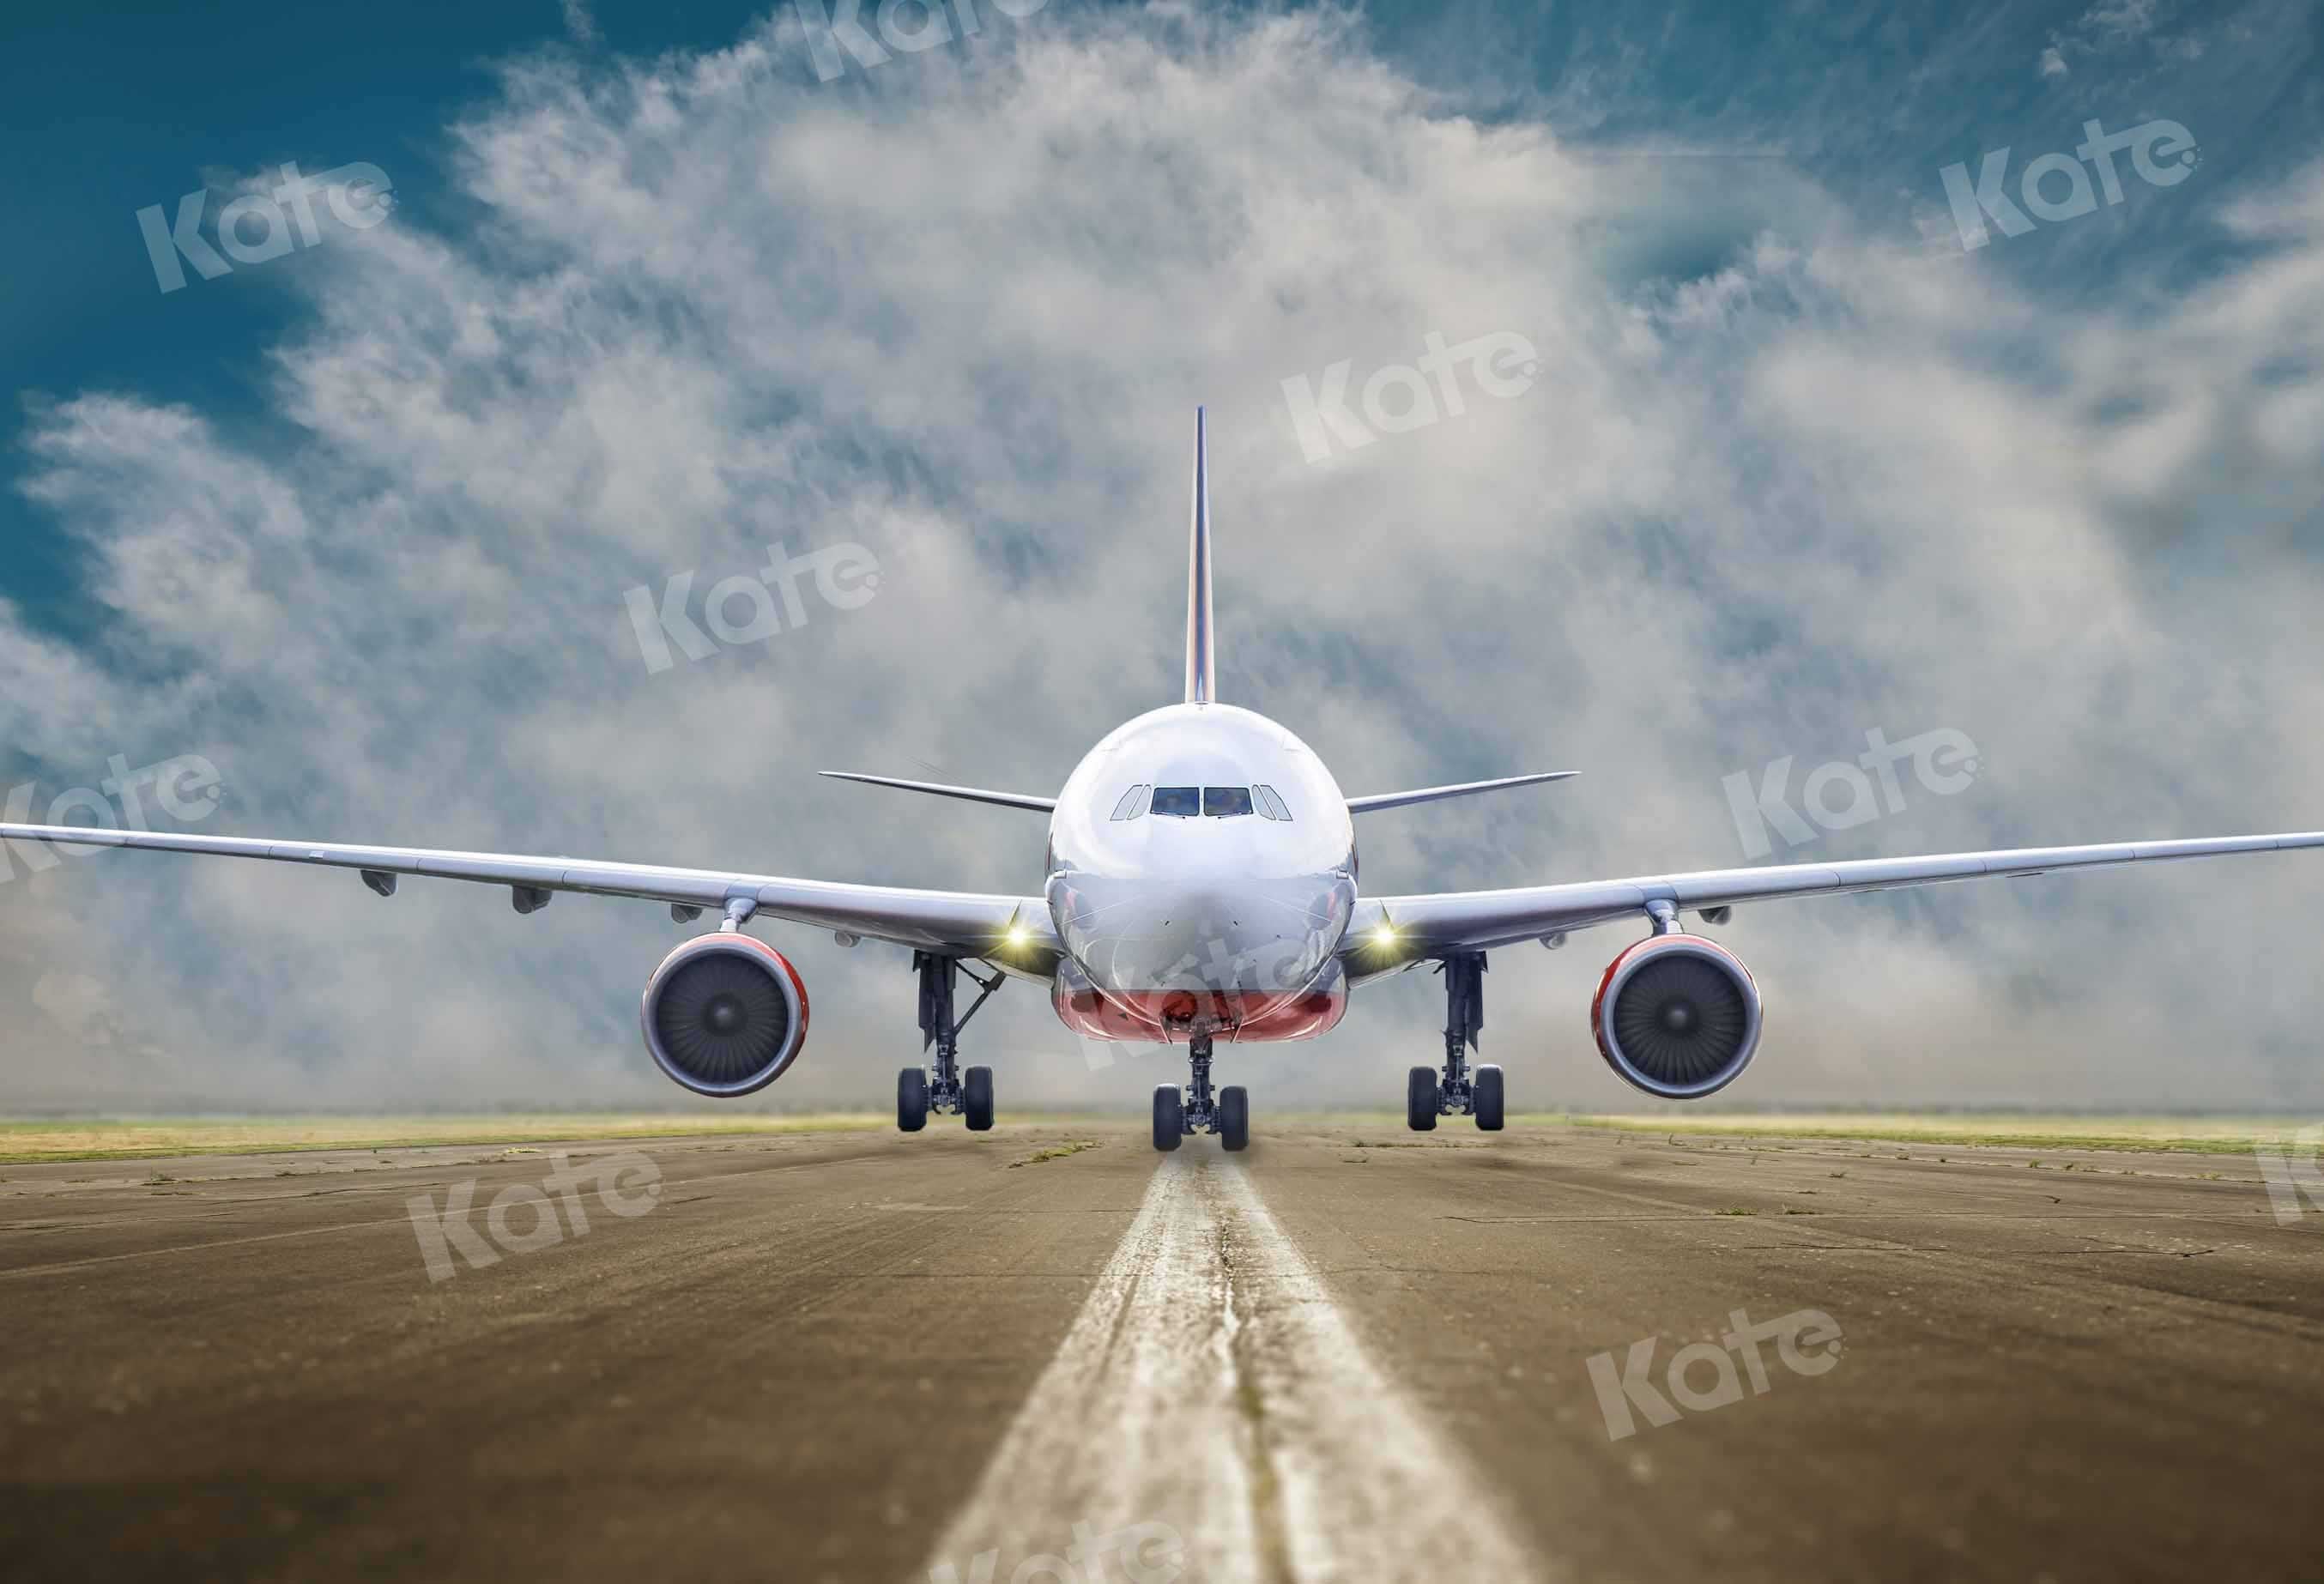 Kate Plane Backdrop Airport Runway Designed by Chain Photography